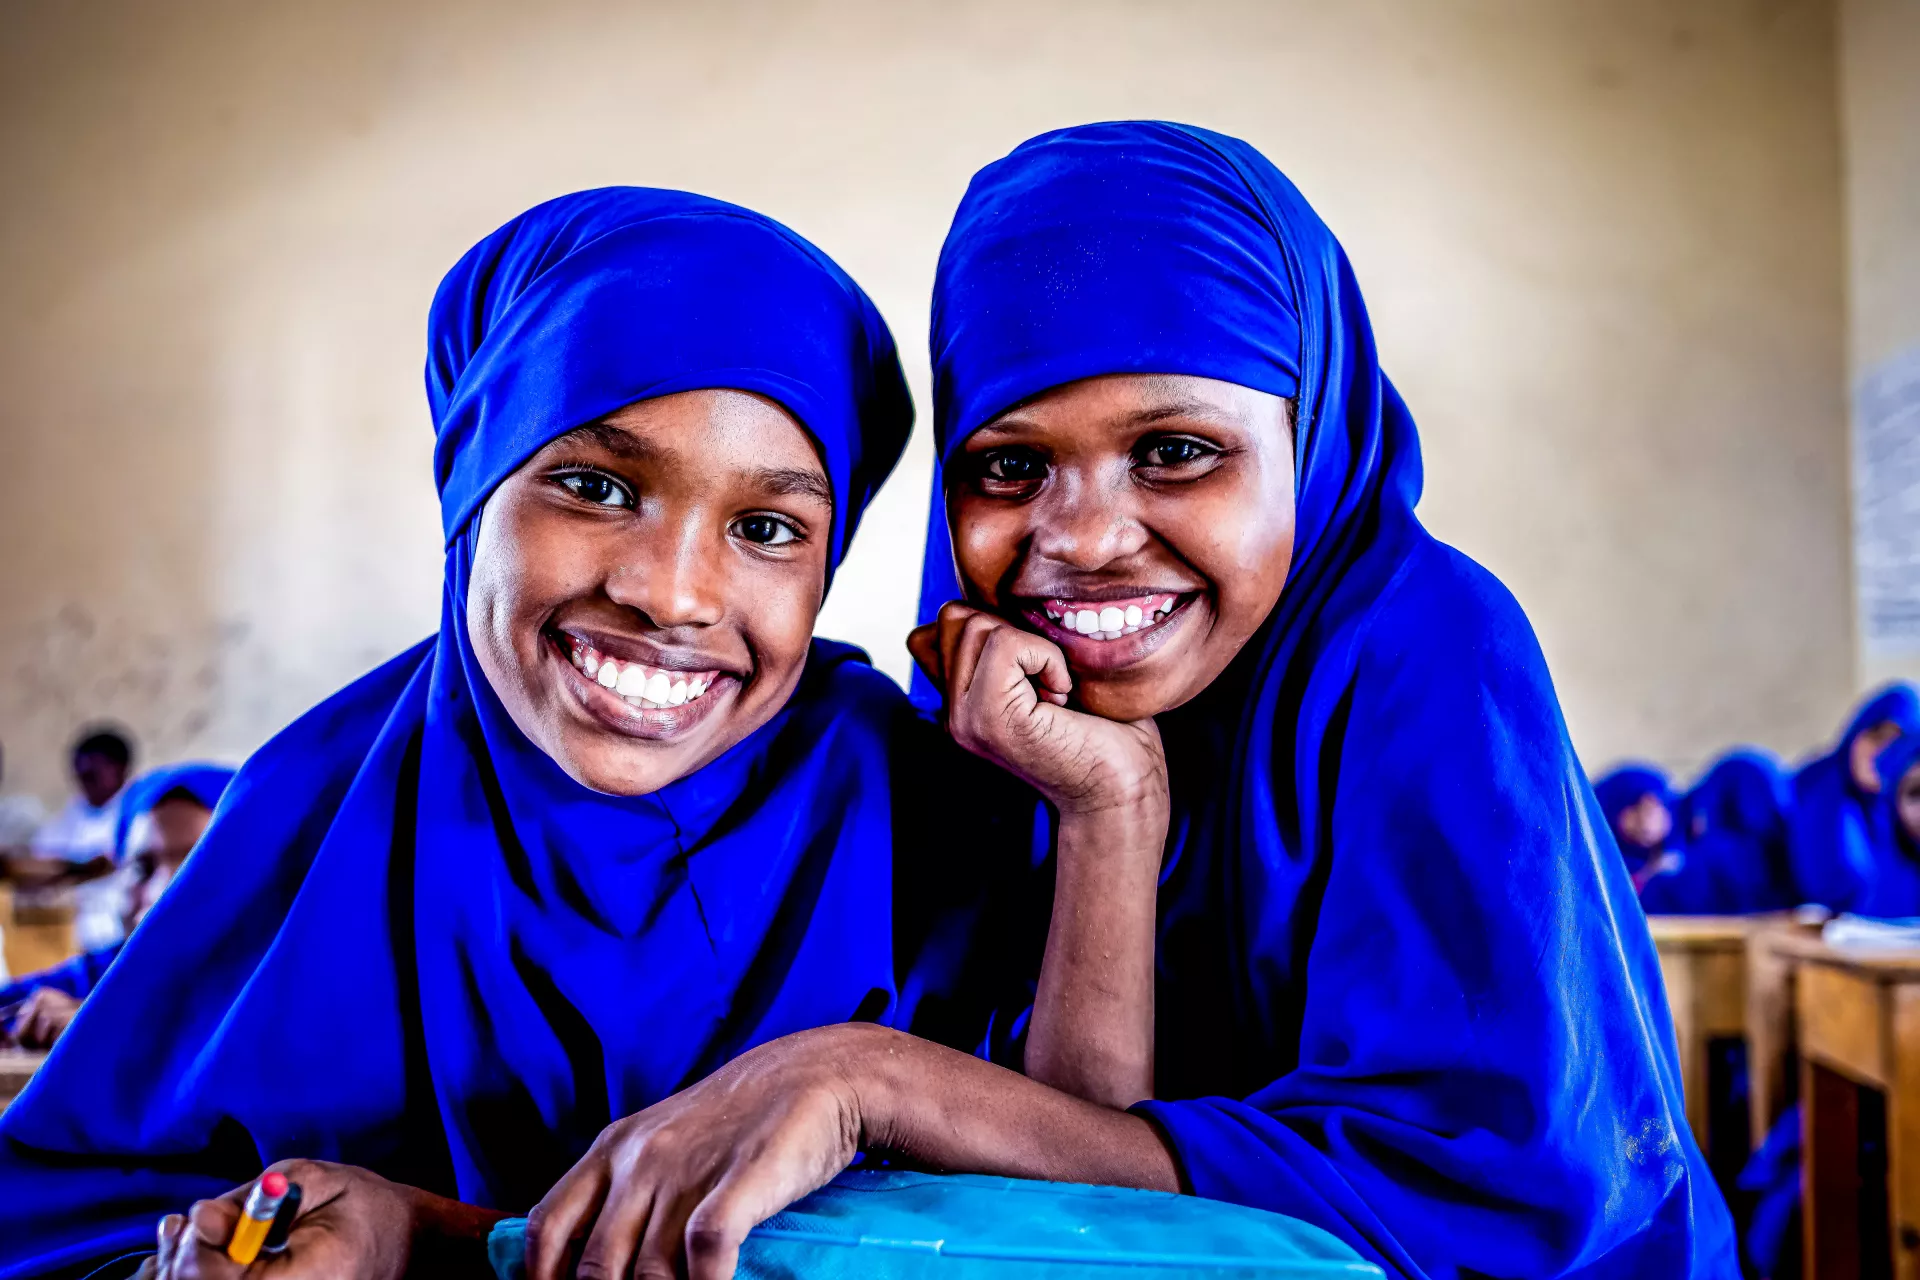 Halimo Abdirahman Ismail, 12 years old, and her friend attend class in Mogadishu, Somalia on 23 January 2021.